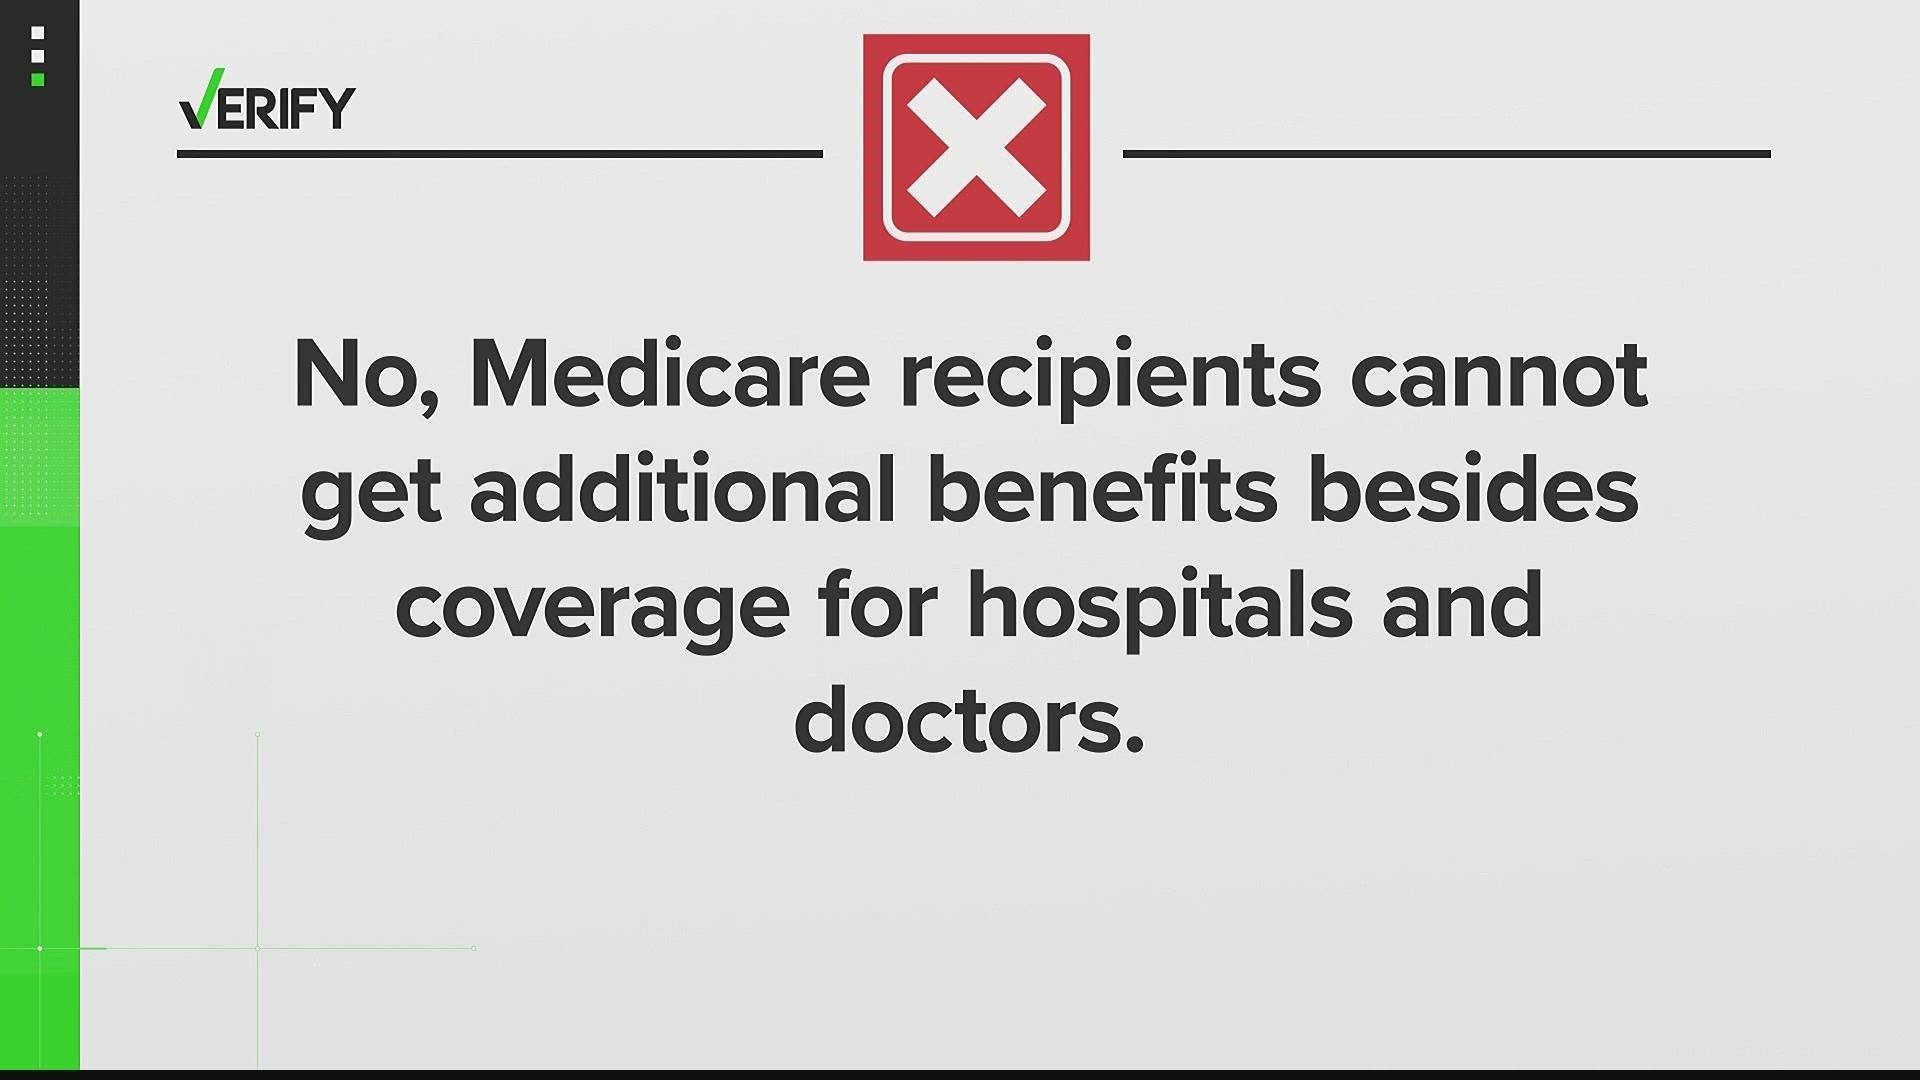 Private insurers can offer non-medical benefits to enrollees of Medicare Advantage plans, but those are different than traditional Medicare.